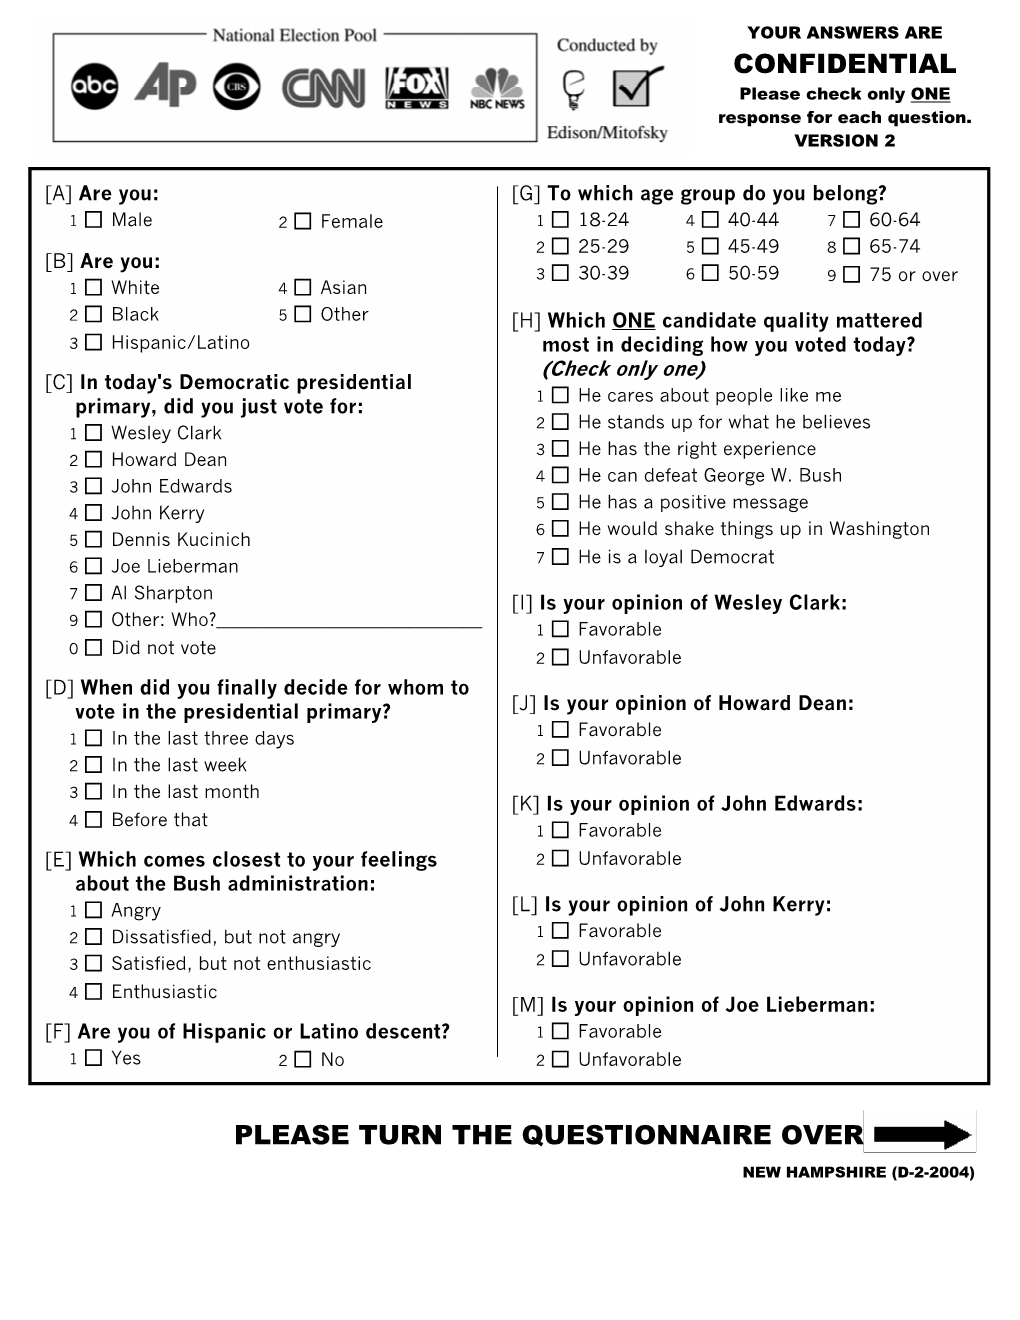 Questionnaire for Voters on Presidential Primary